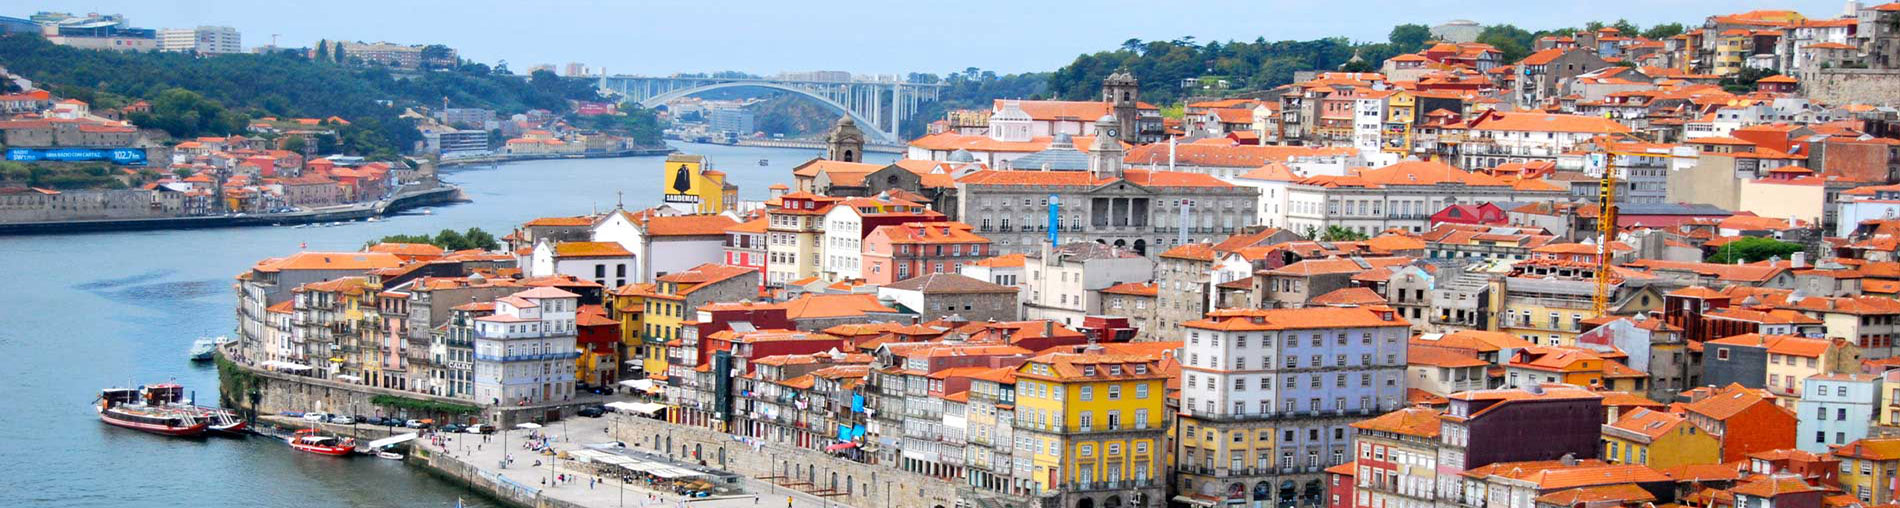 Portugal Tour Package From India